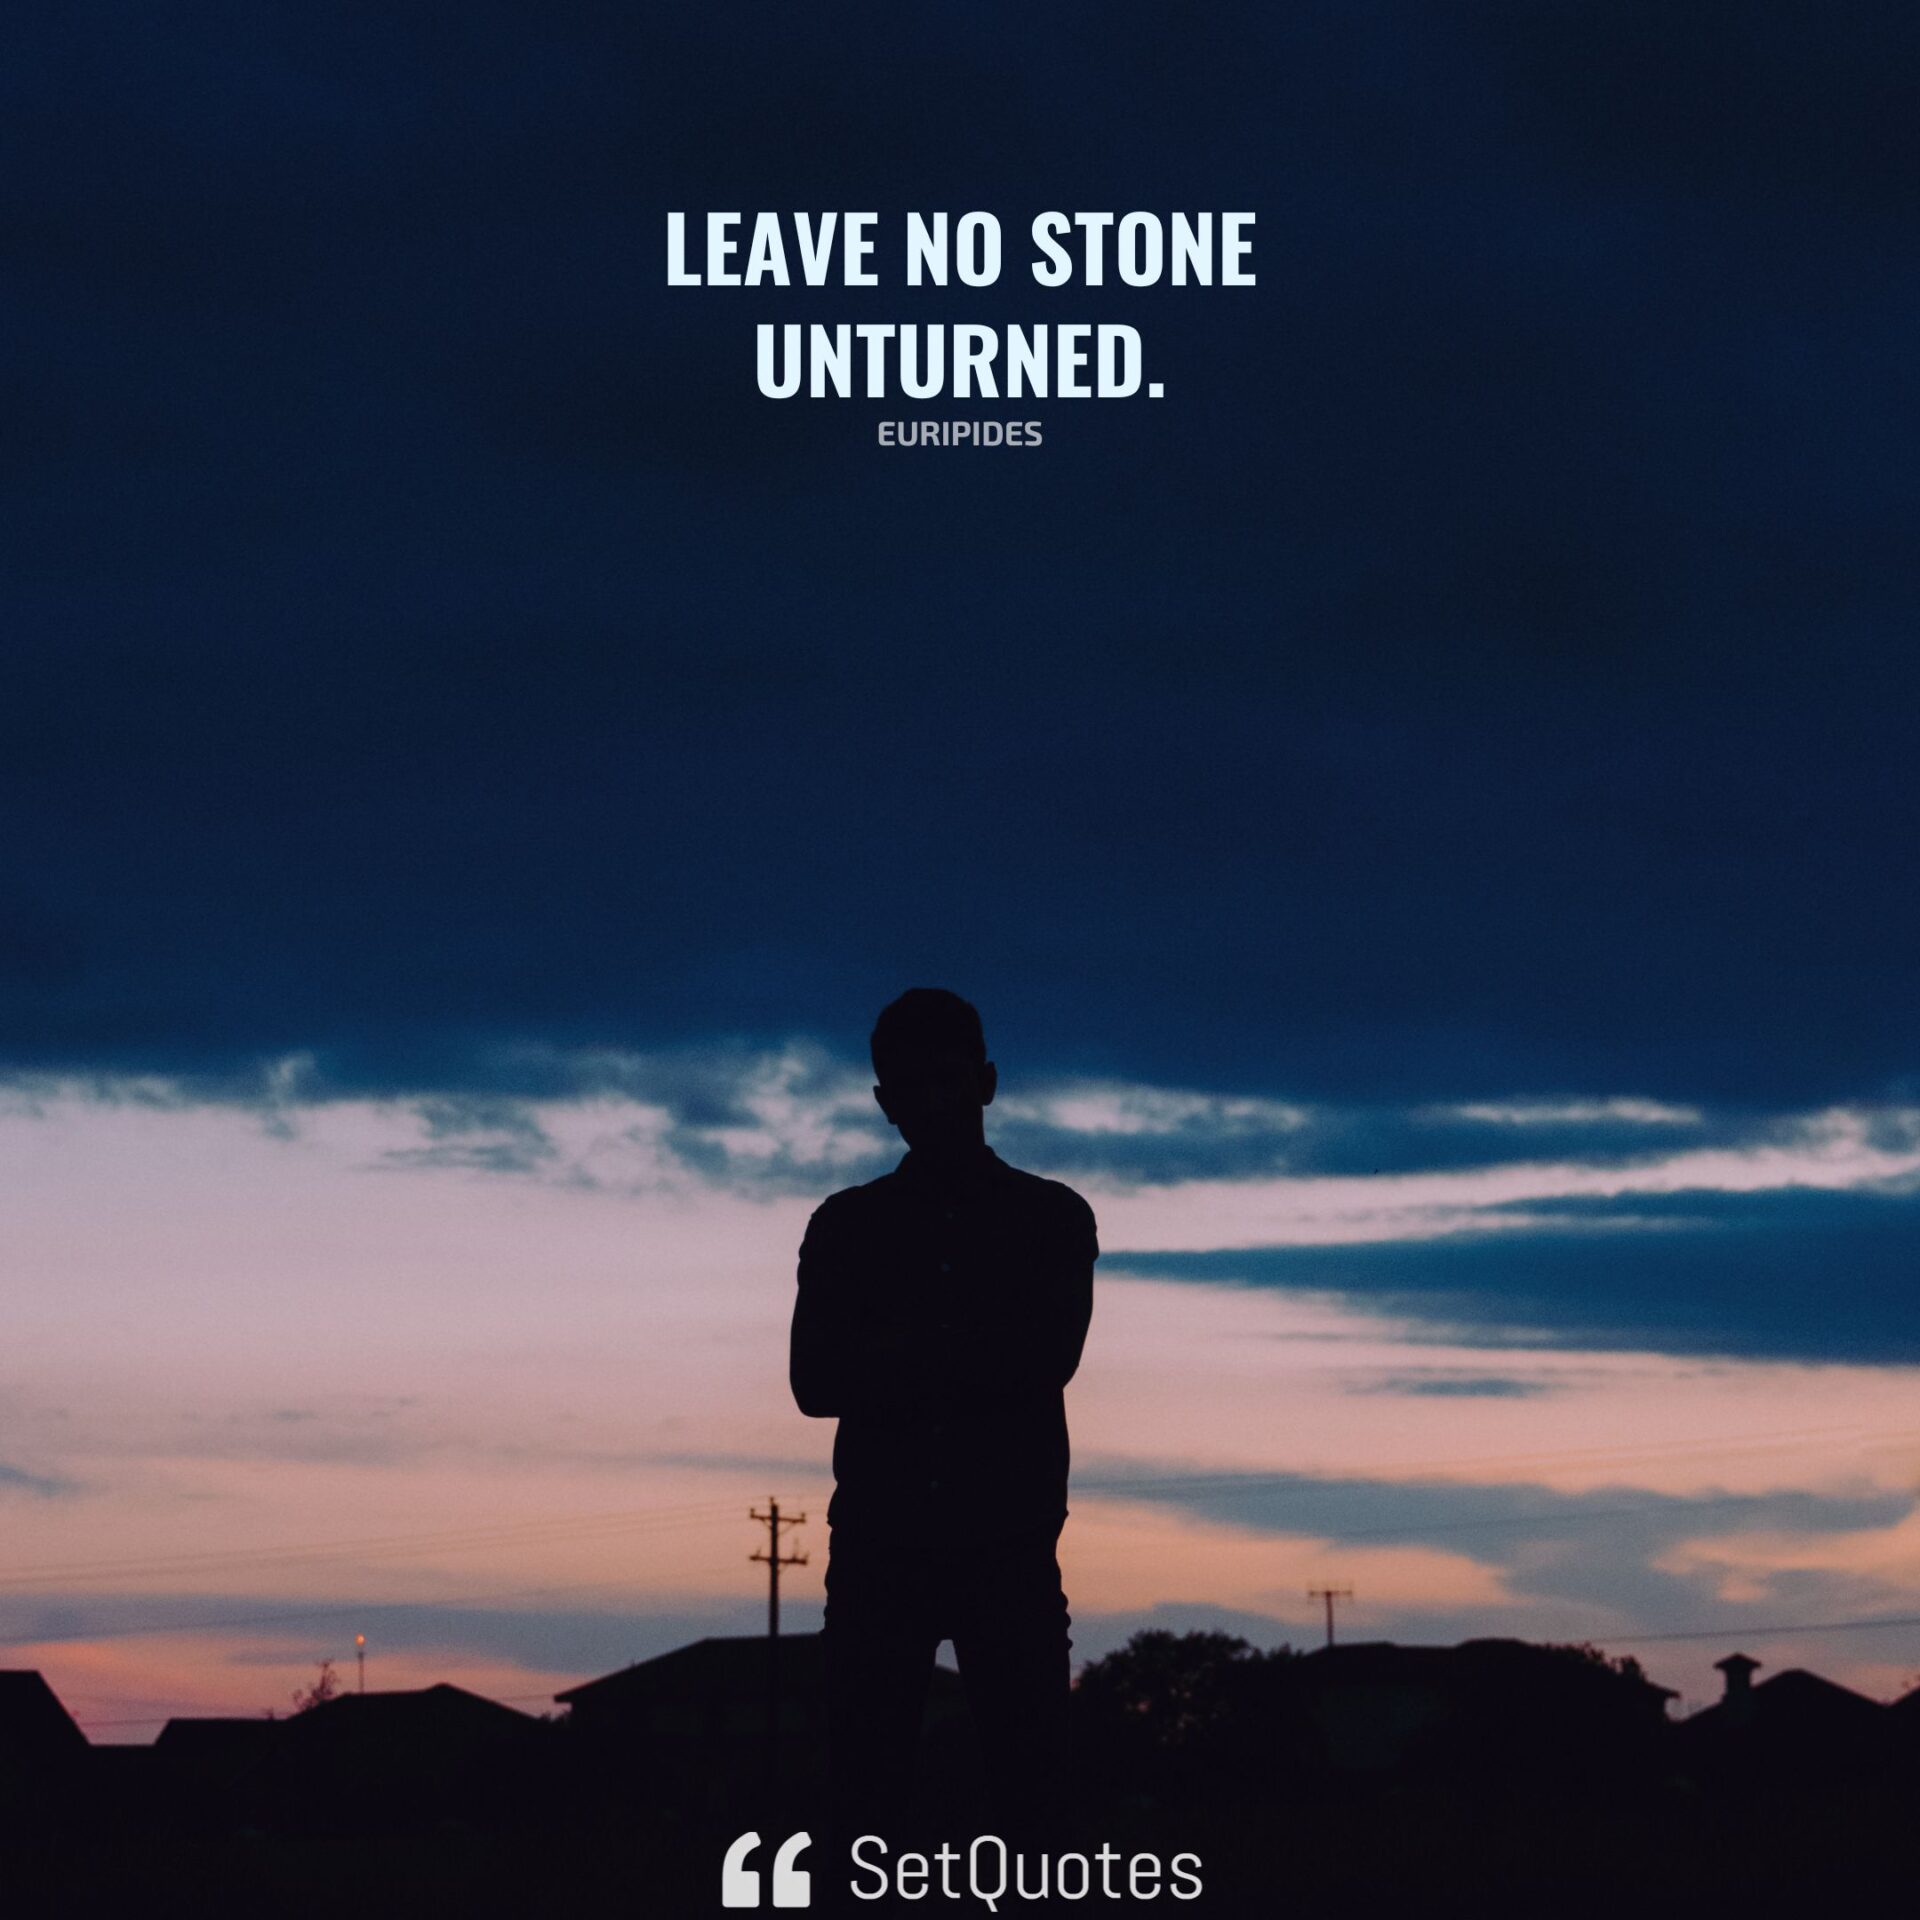 Leave no stone unturned Meaning